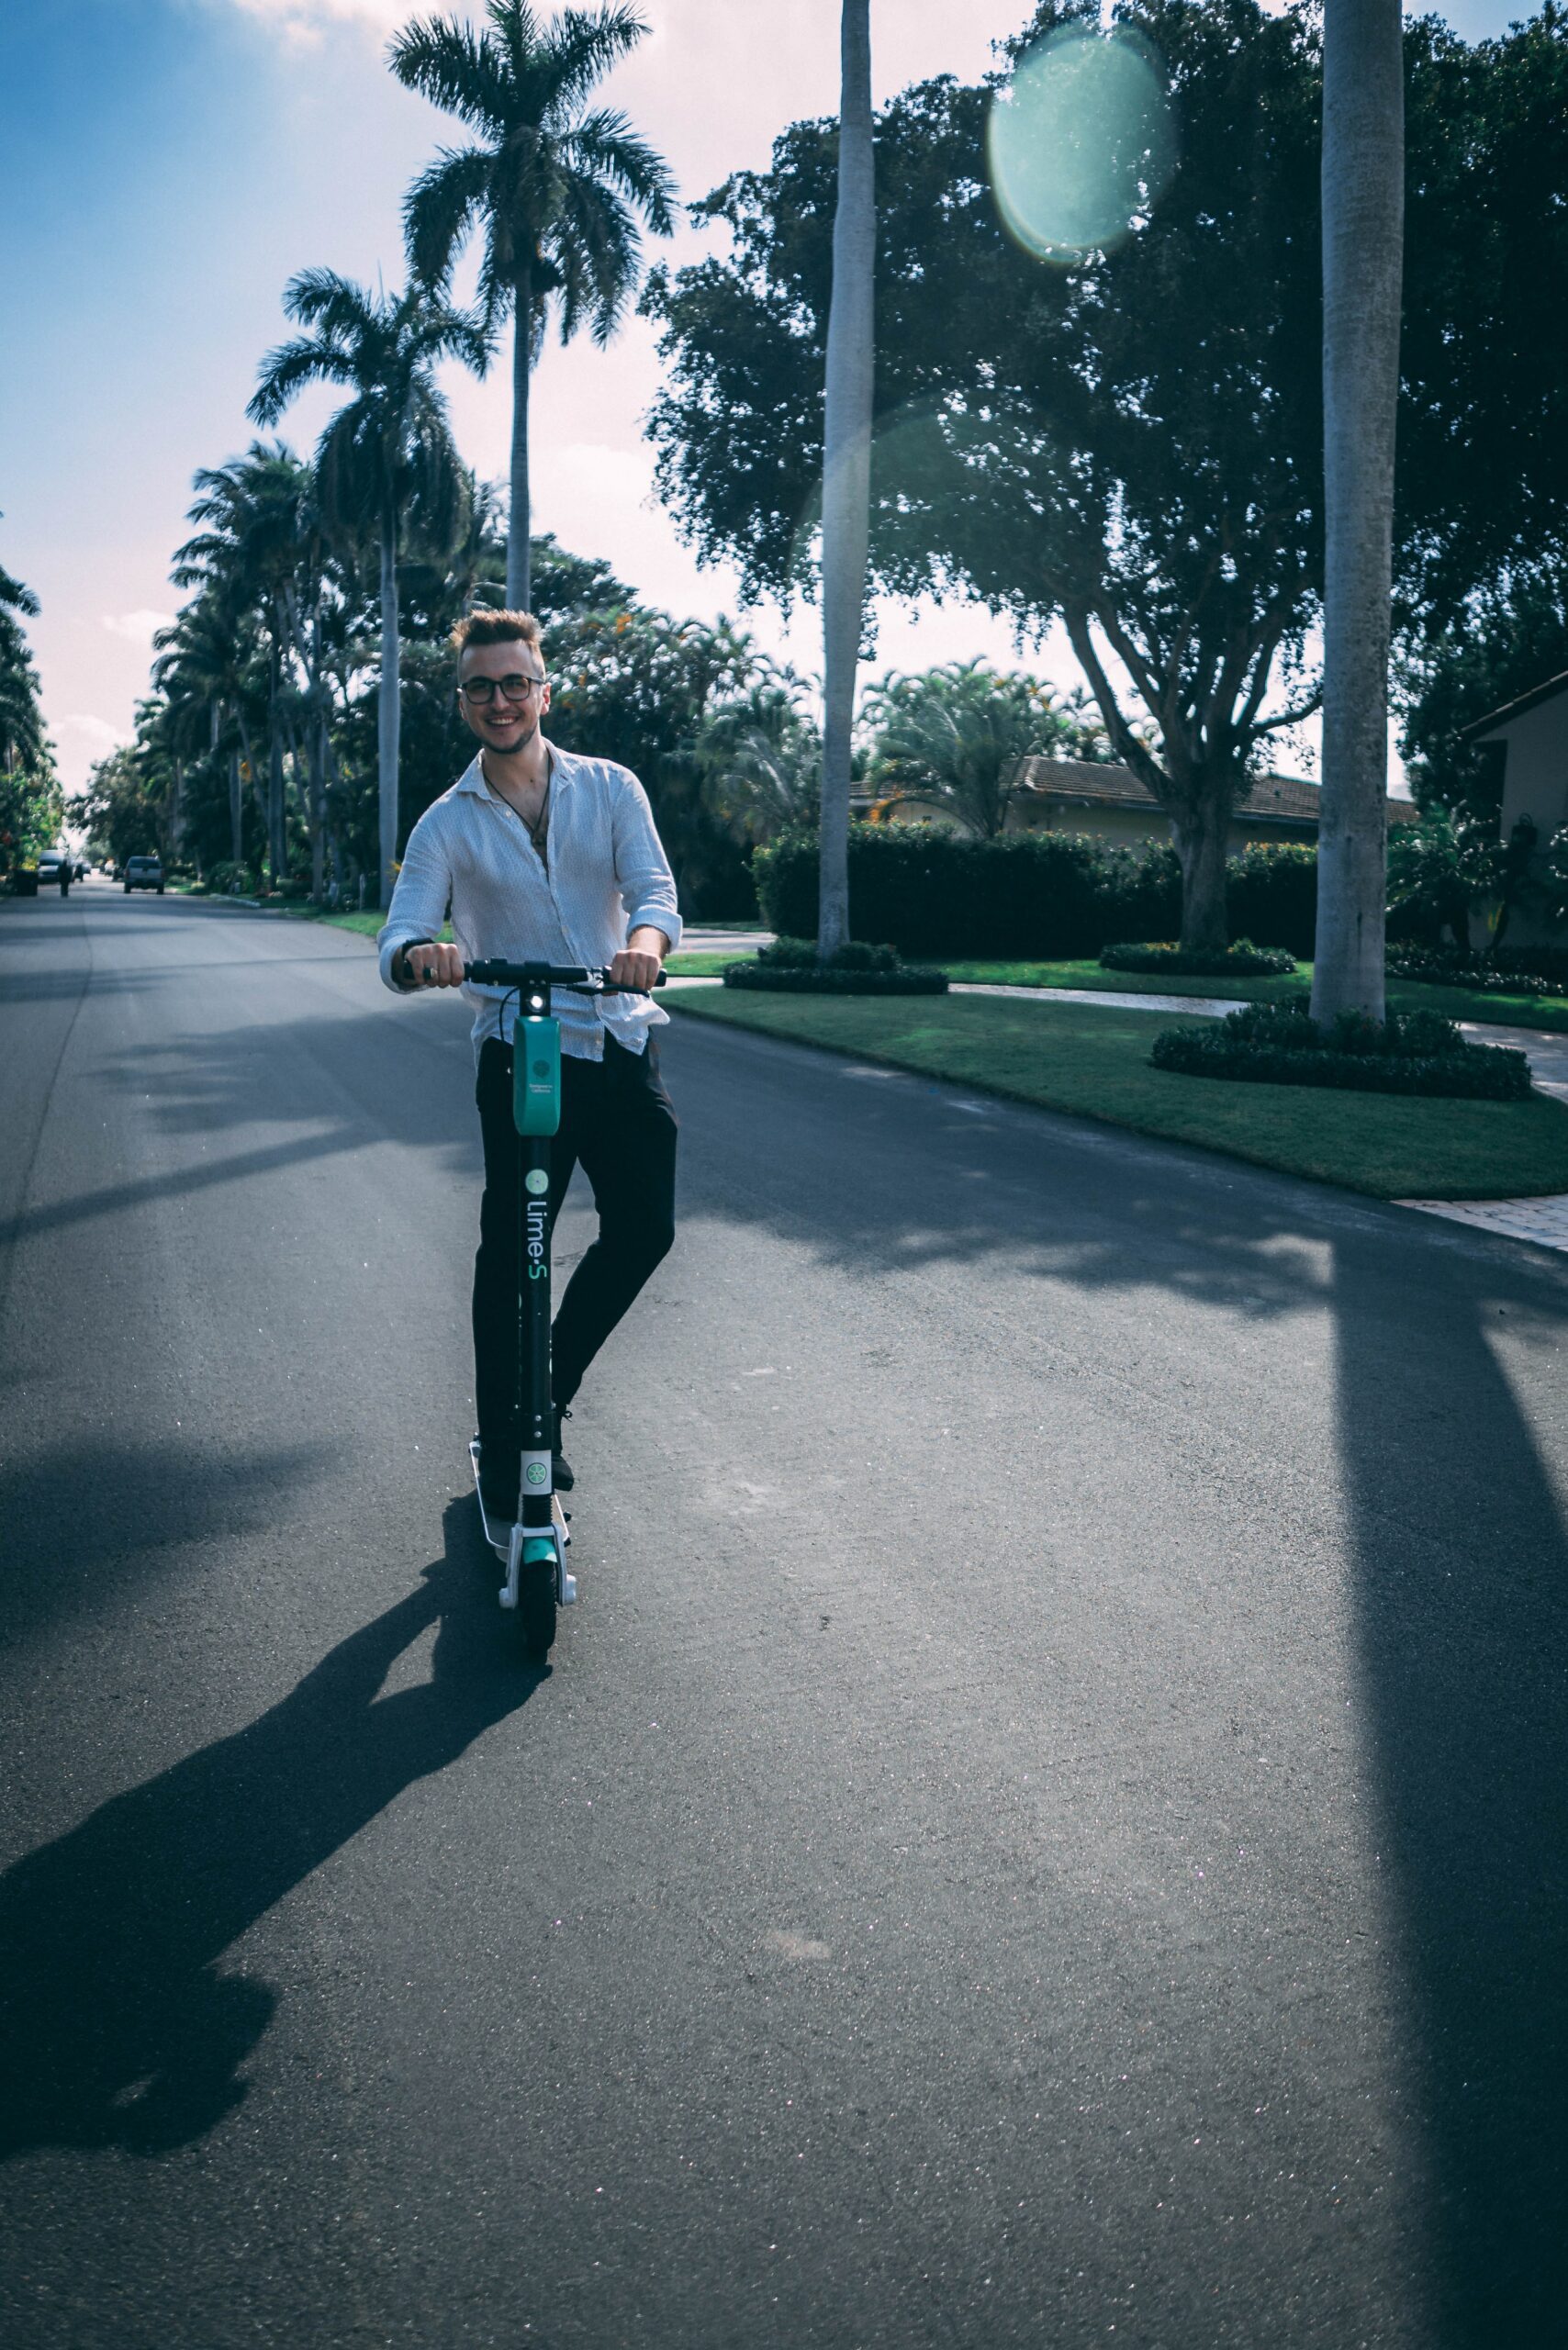 5 Fastest electric scooters in 2023